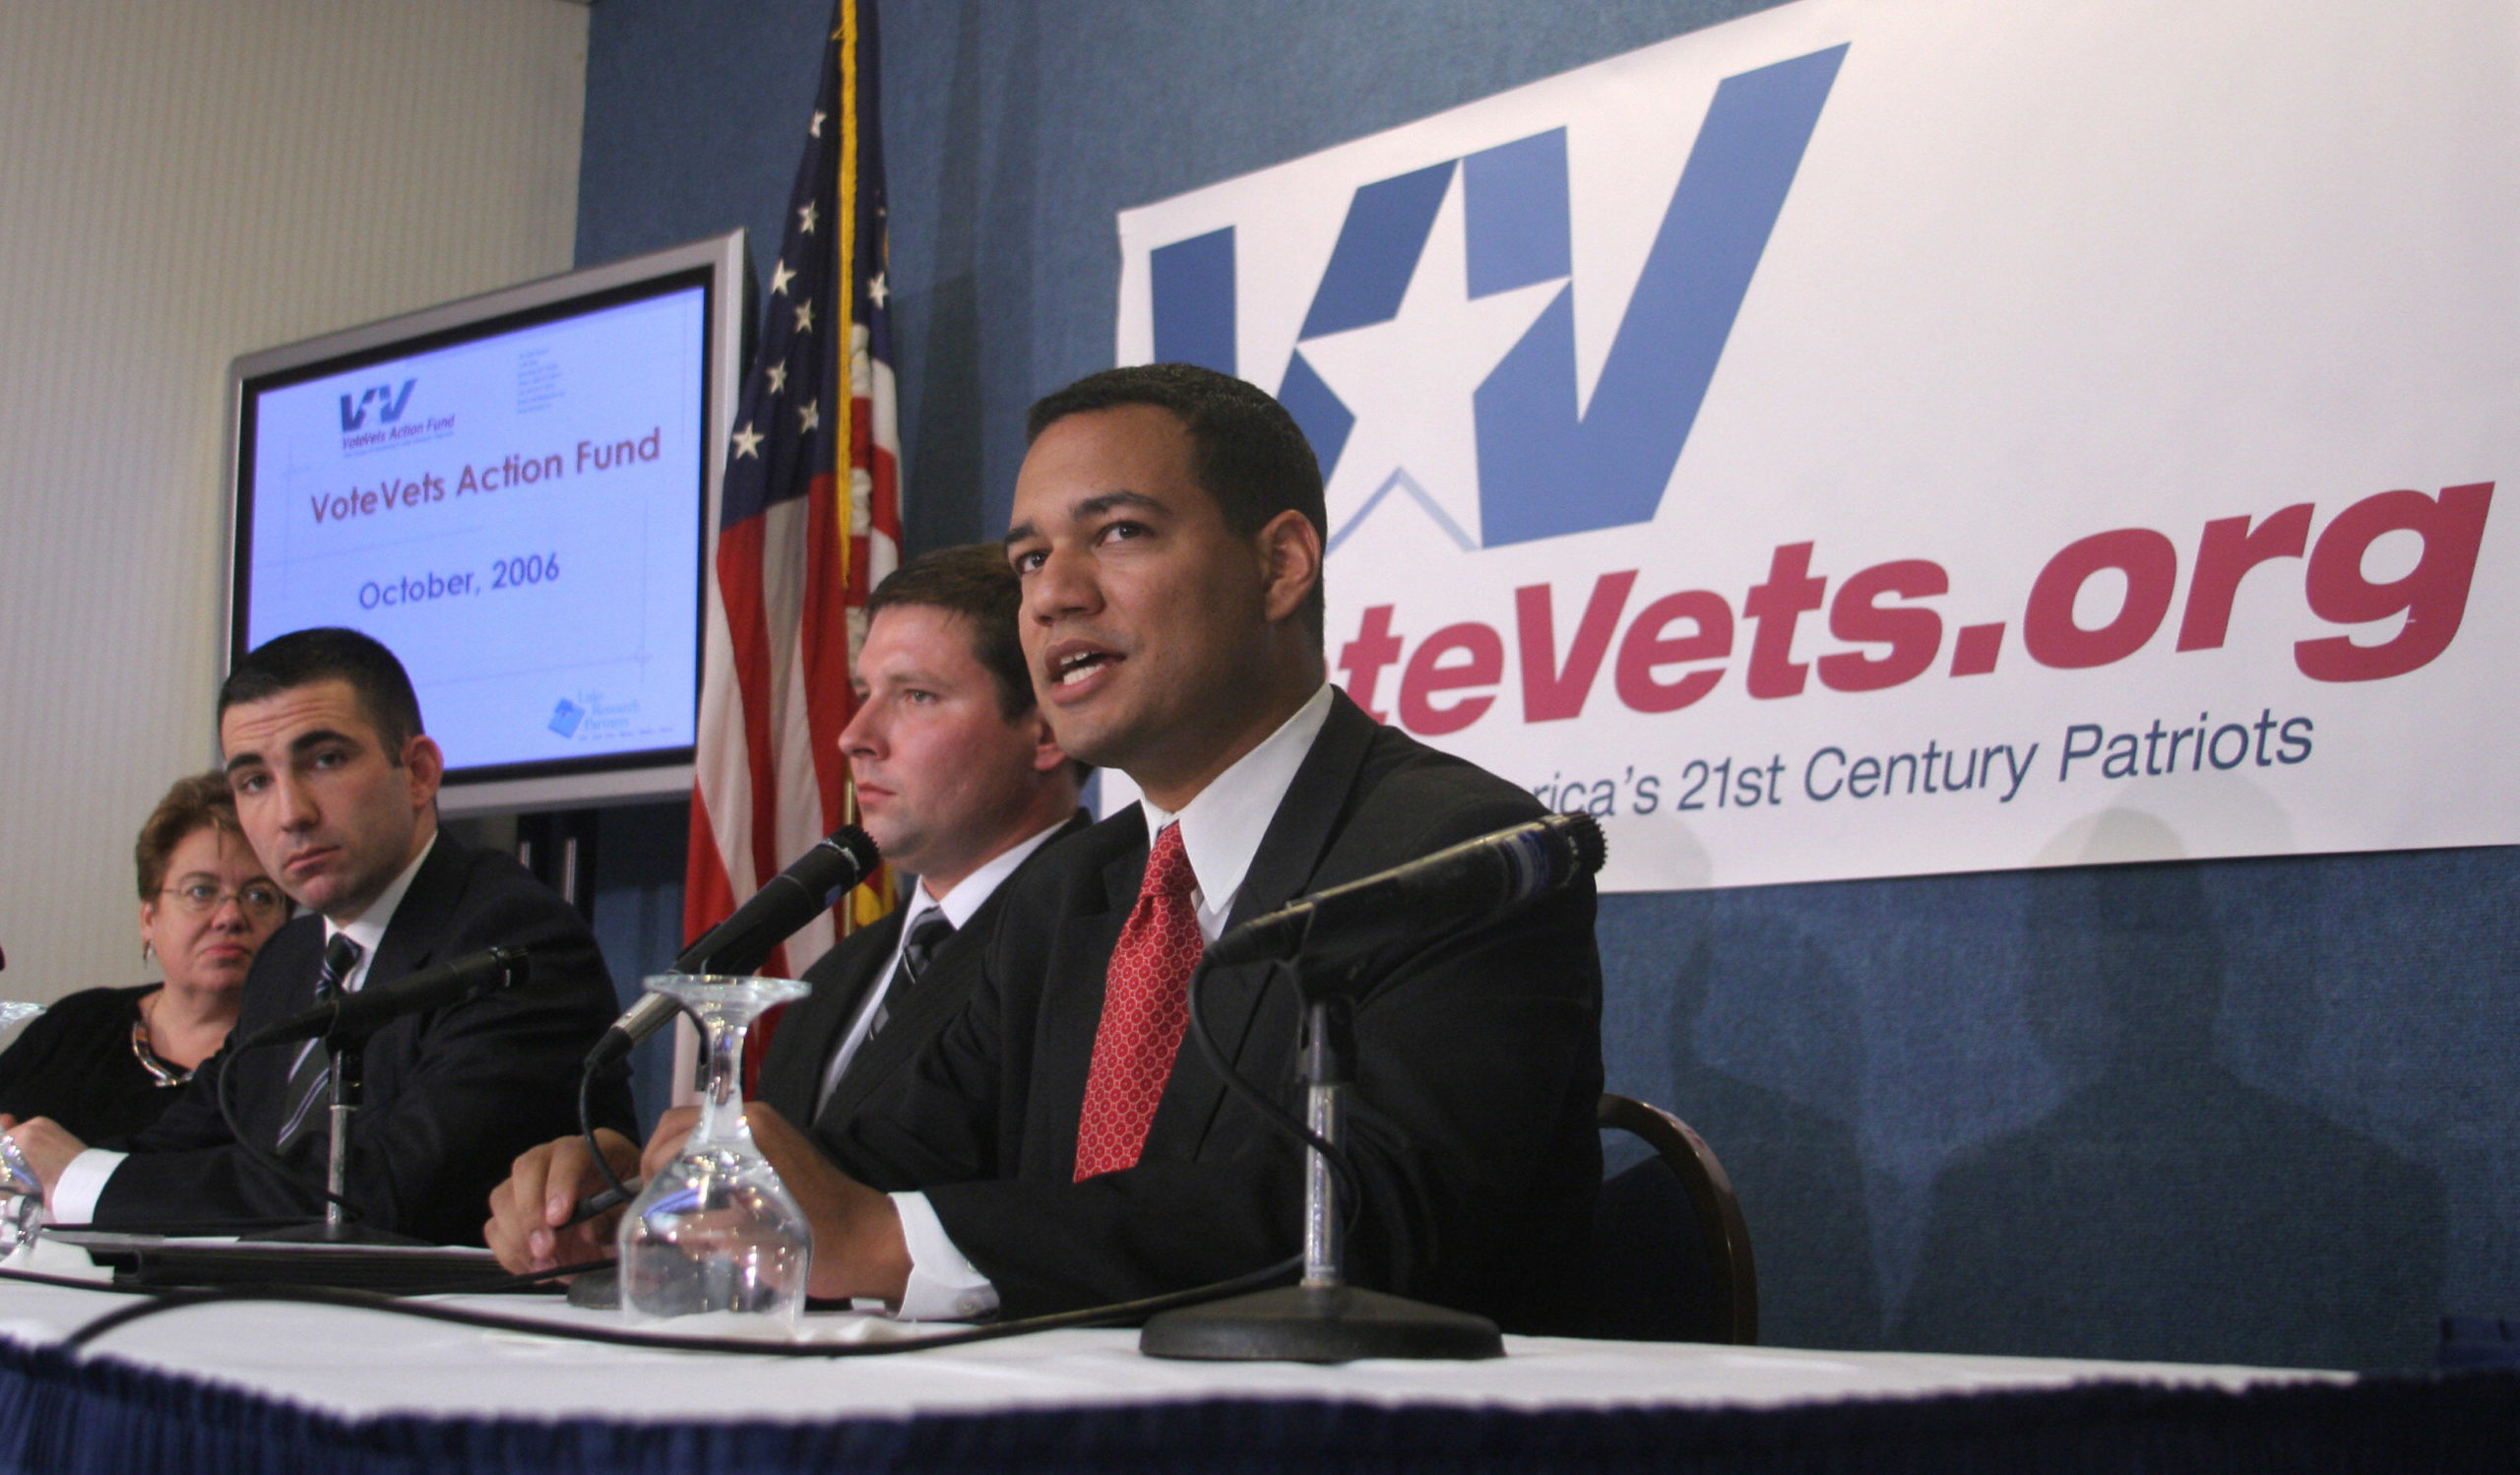 Washington, UNITED STATES: VoteVets.org co-founder and president Jeremy Broussard speaks during a press conference by the veterans advocacy group in Washington 04 October 2006 as Lake Research Partners president Celinda Lake (L), Jon Soltz (2nd L), co-founder and chairman of VoteVets. org Action Fund and VoteVets.org senior advisor Sam Schultz (2nd R) look on. US troops serving in Iraq and Afghanistan lack proper equipment, are overstretched and face serious health problems upon their return home, according to a poll released by the group. AFP PHOTO/Nicholas KAMM (Photo credit should read NICHOLAS KAMM/AFP via Getty Images)